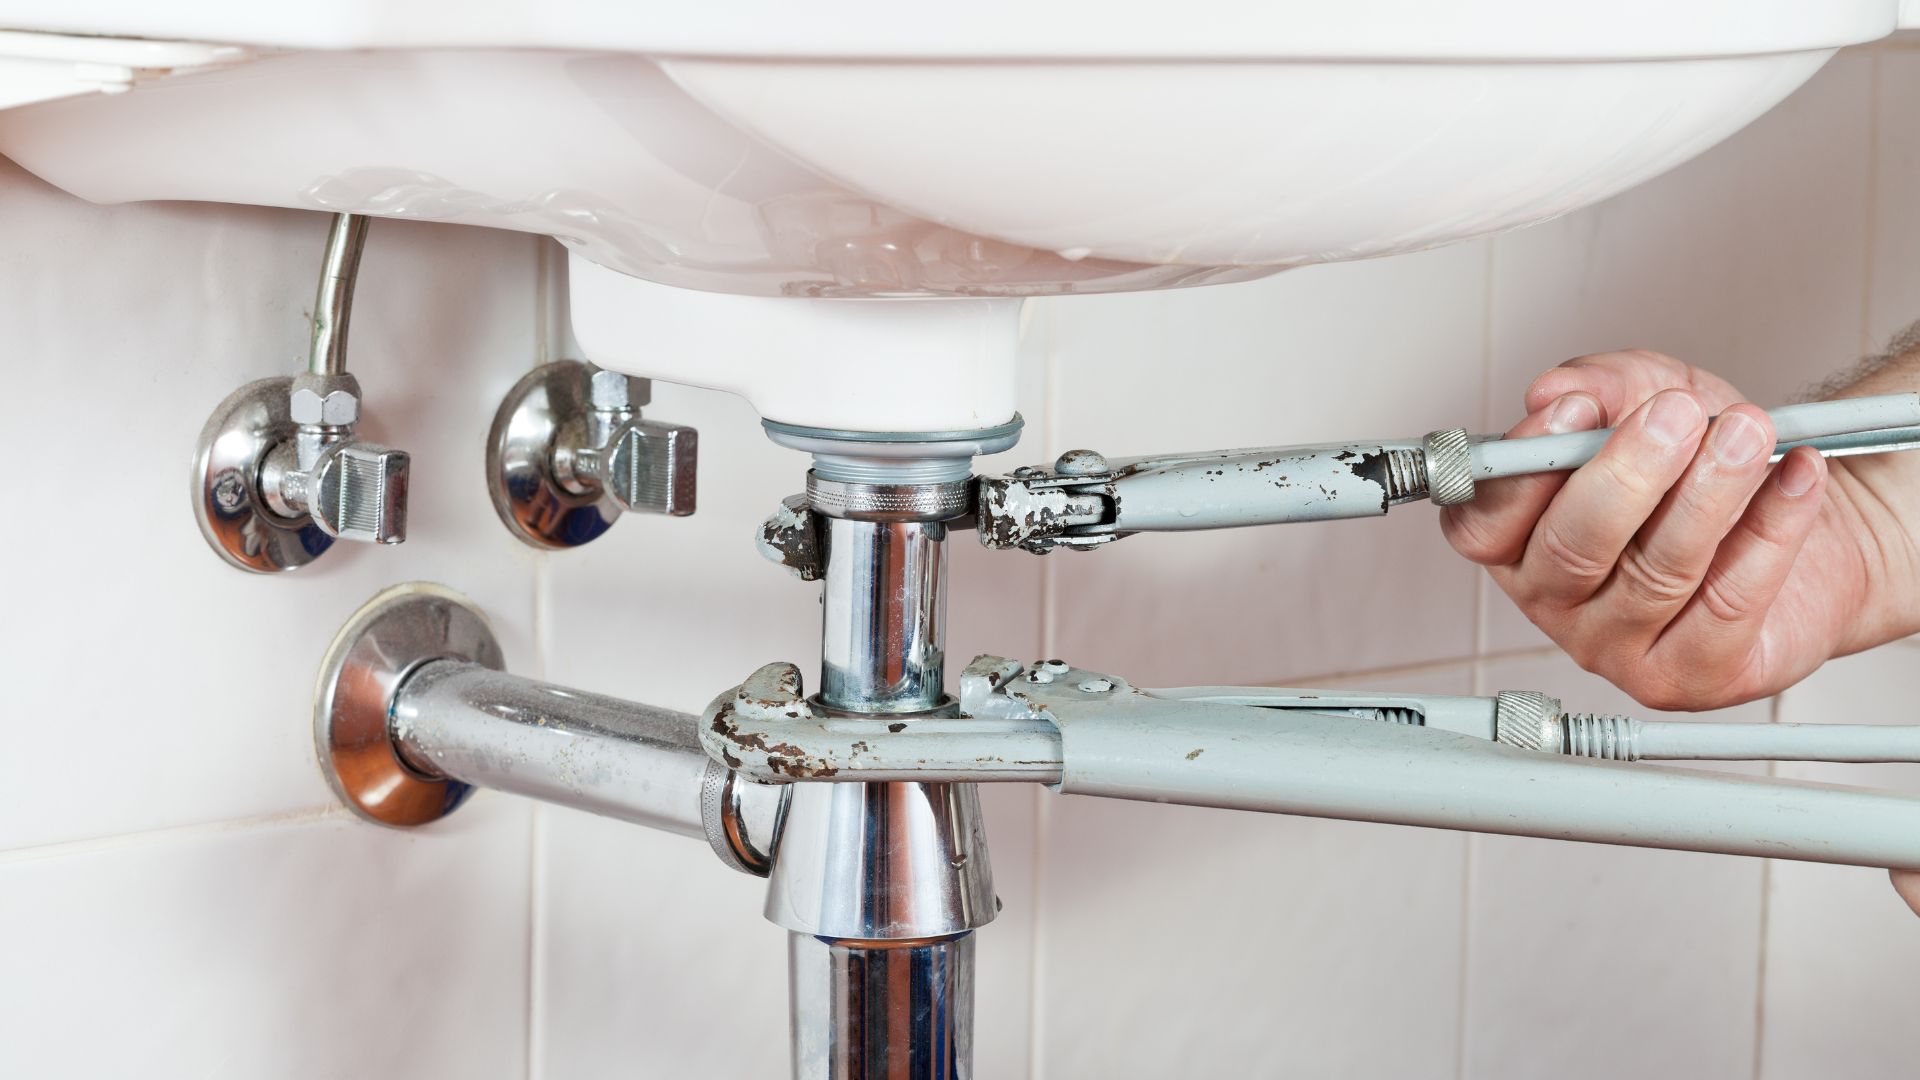 Drain Cleaning in North Port, Florida with Major League Plumbing